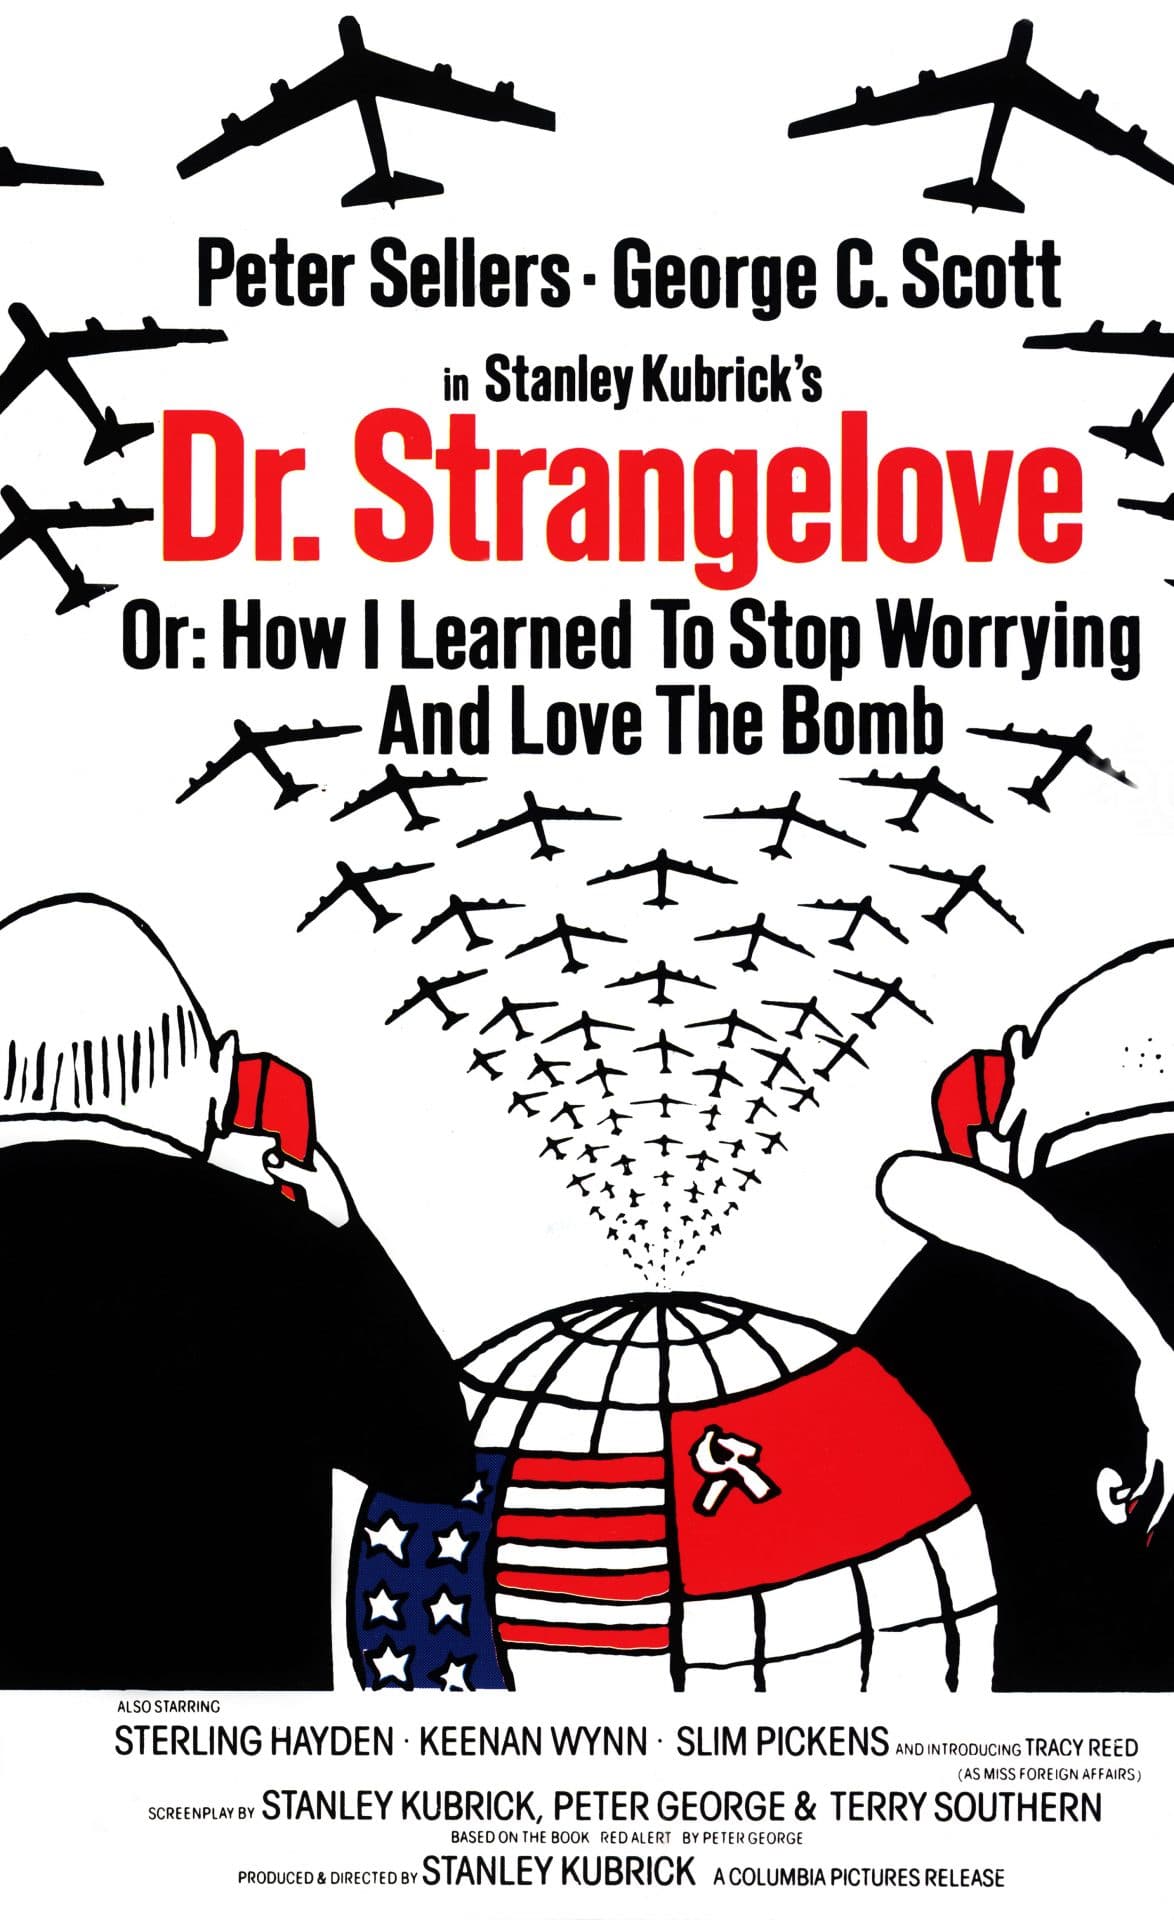 How To Learn To Love The Bomb